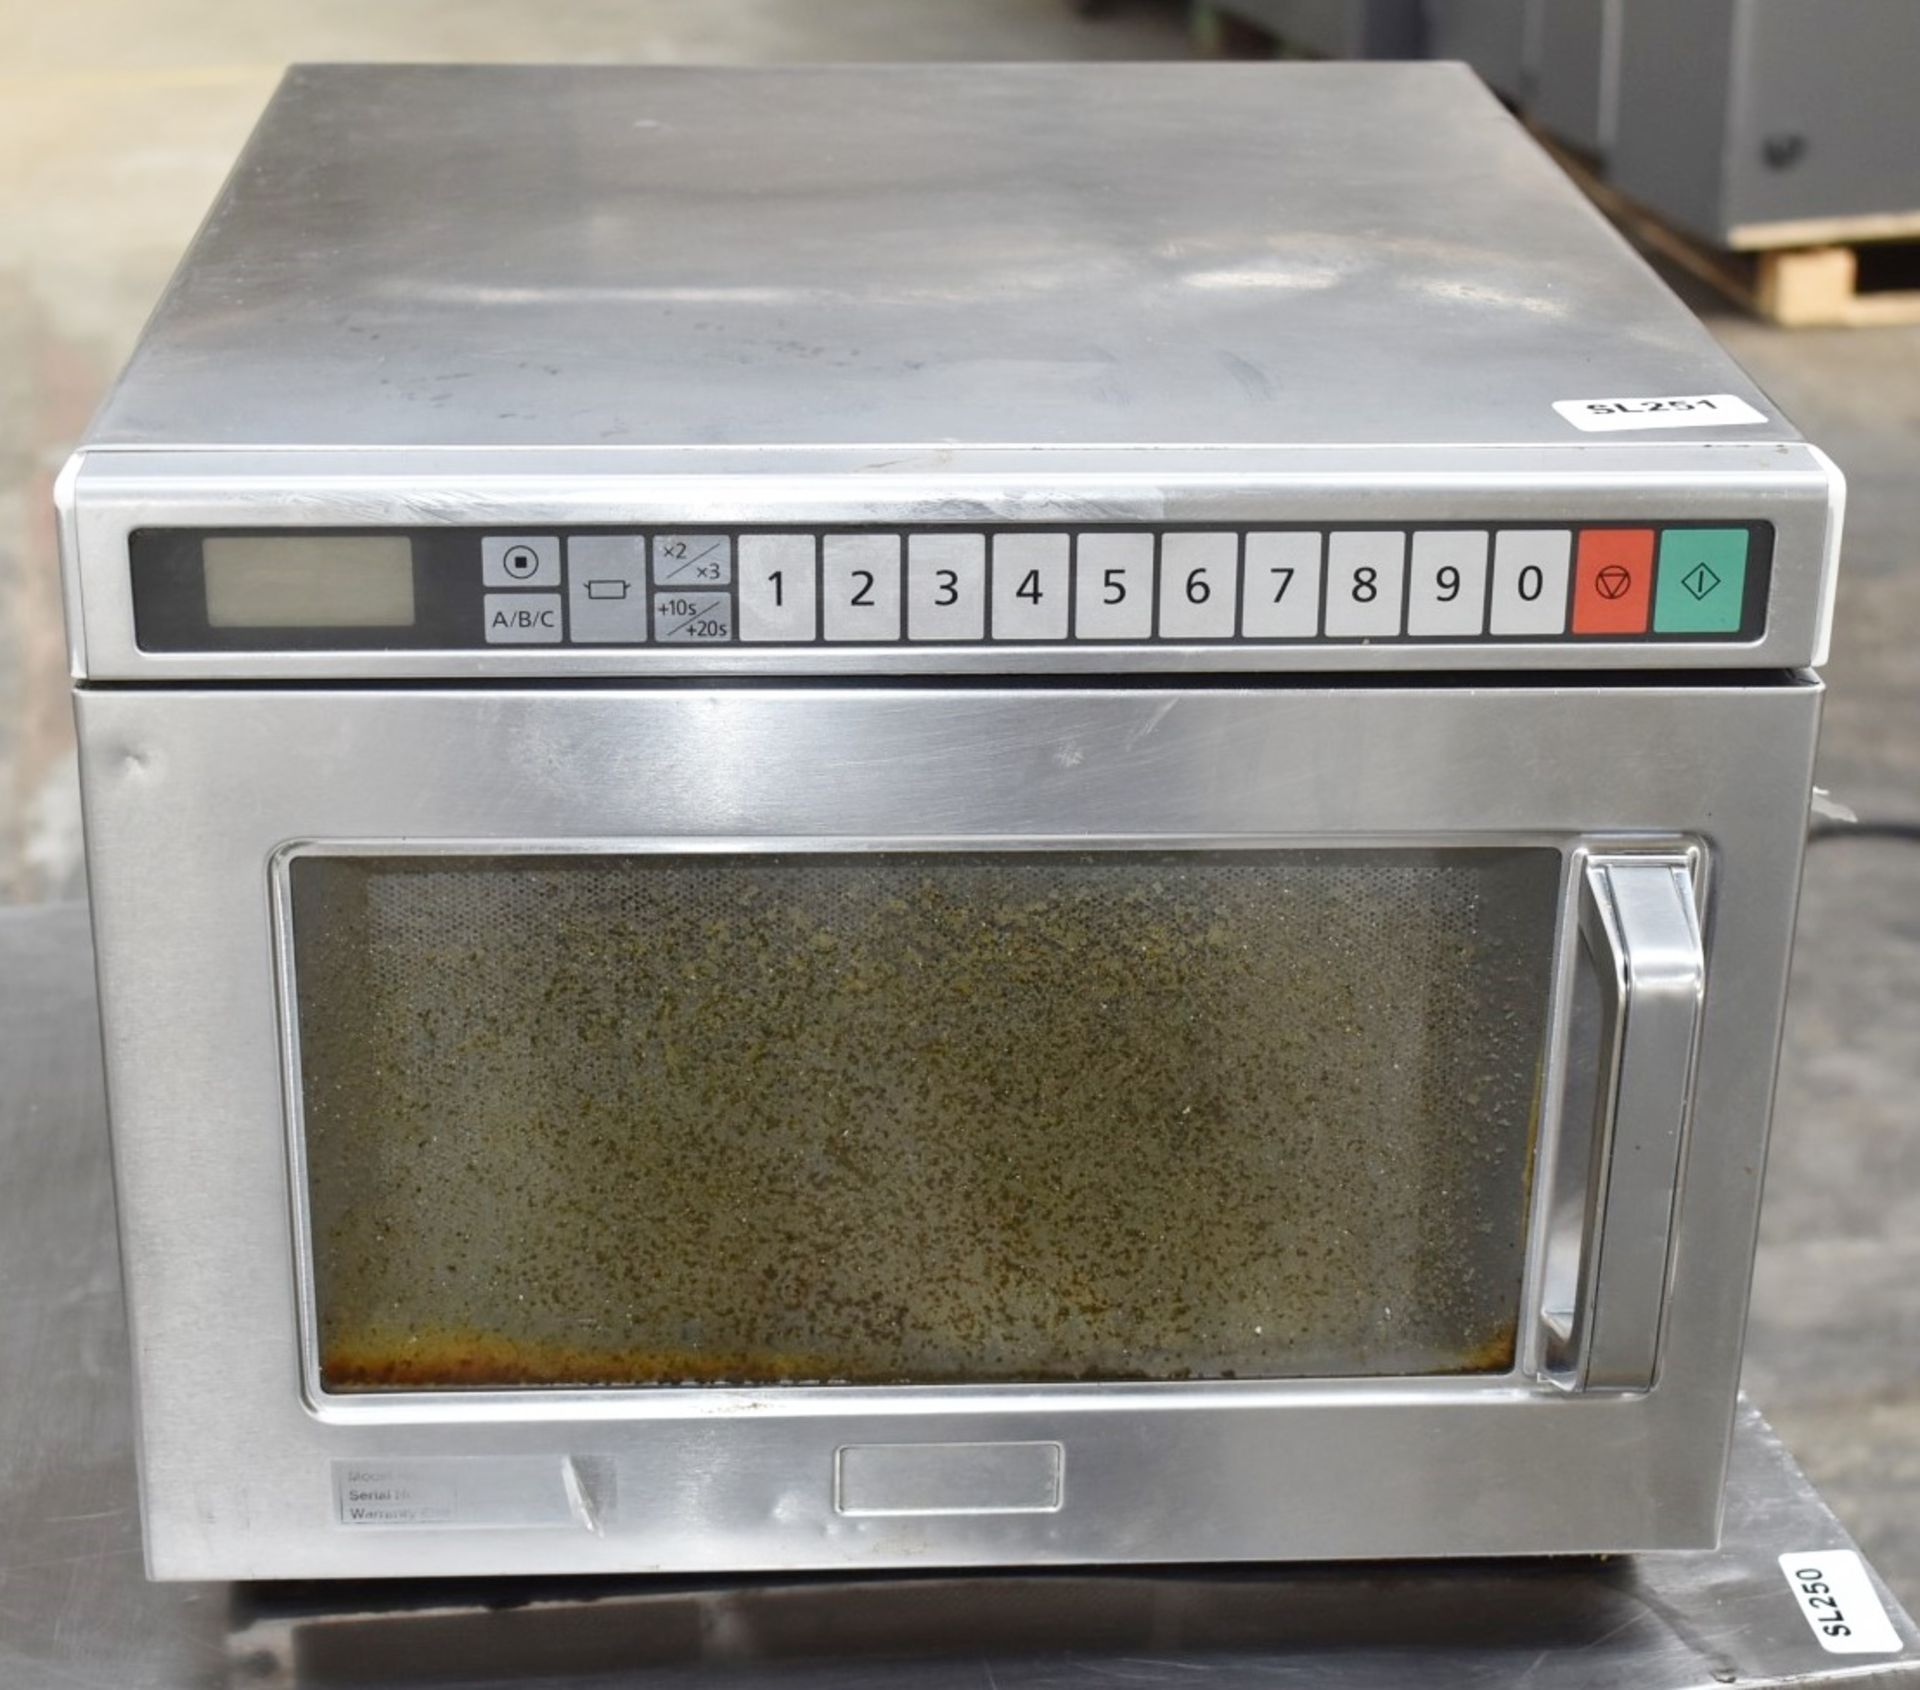 1 x Panasonic Commercial Microwave Oven With Stainless Steel Exterior - Recently Removed From